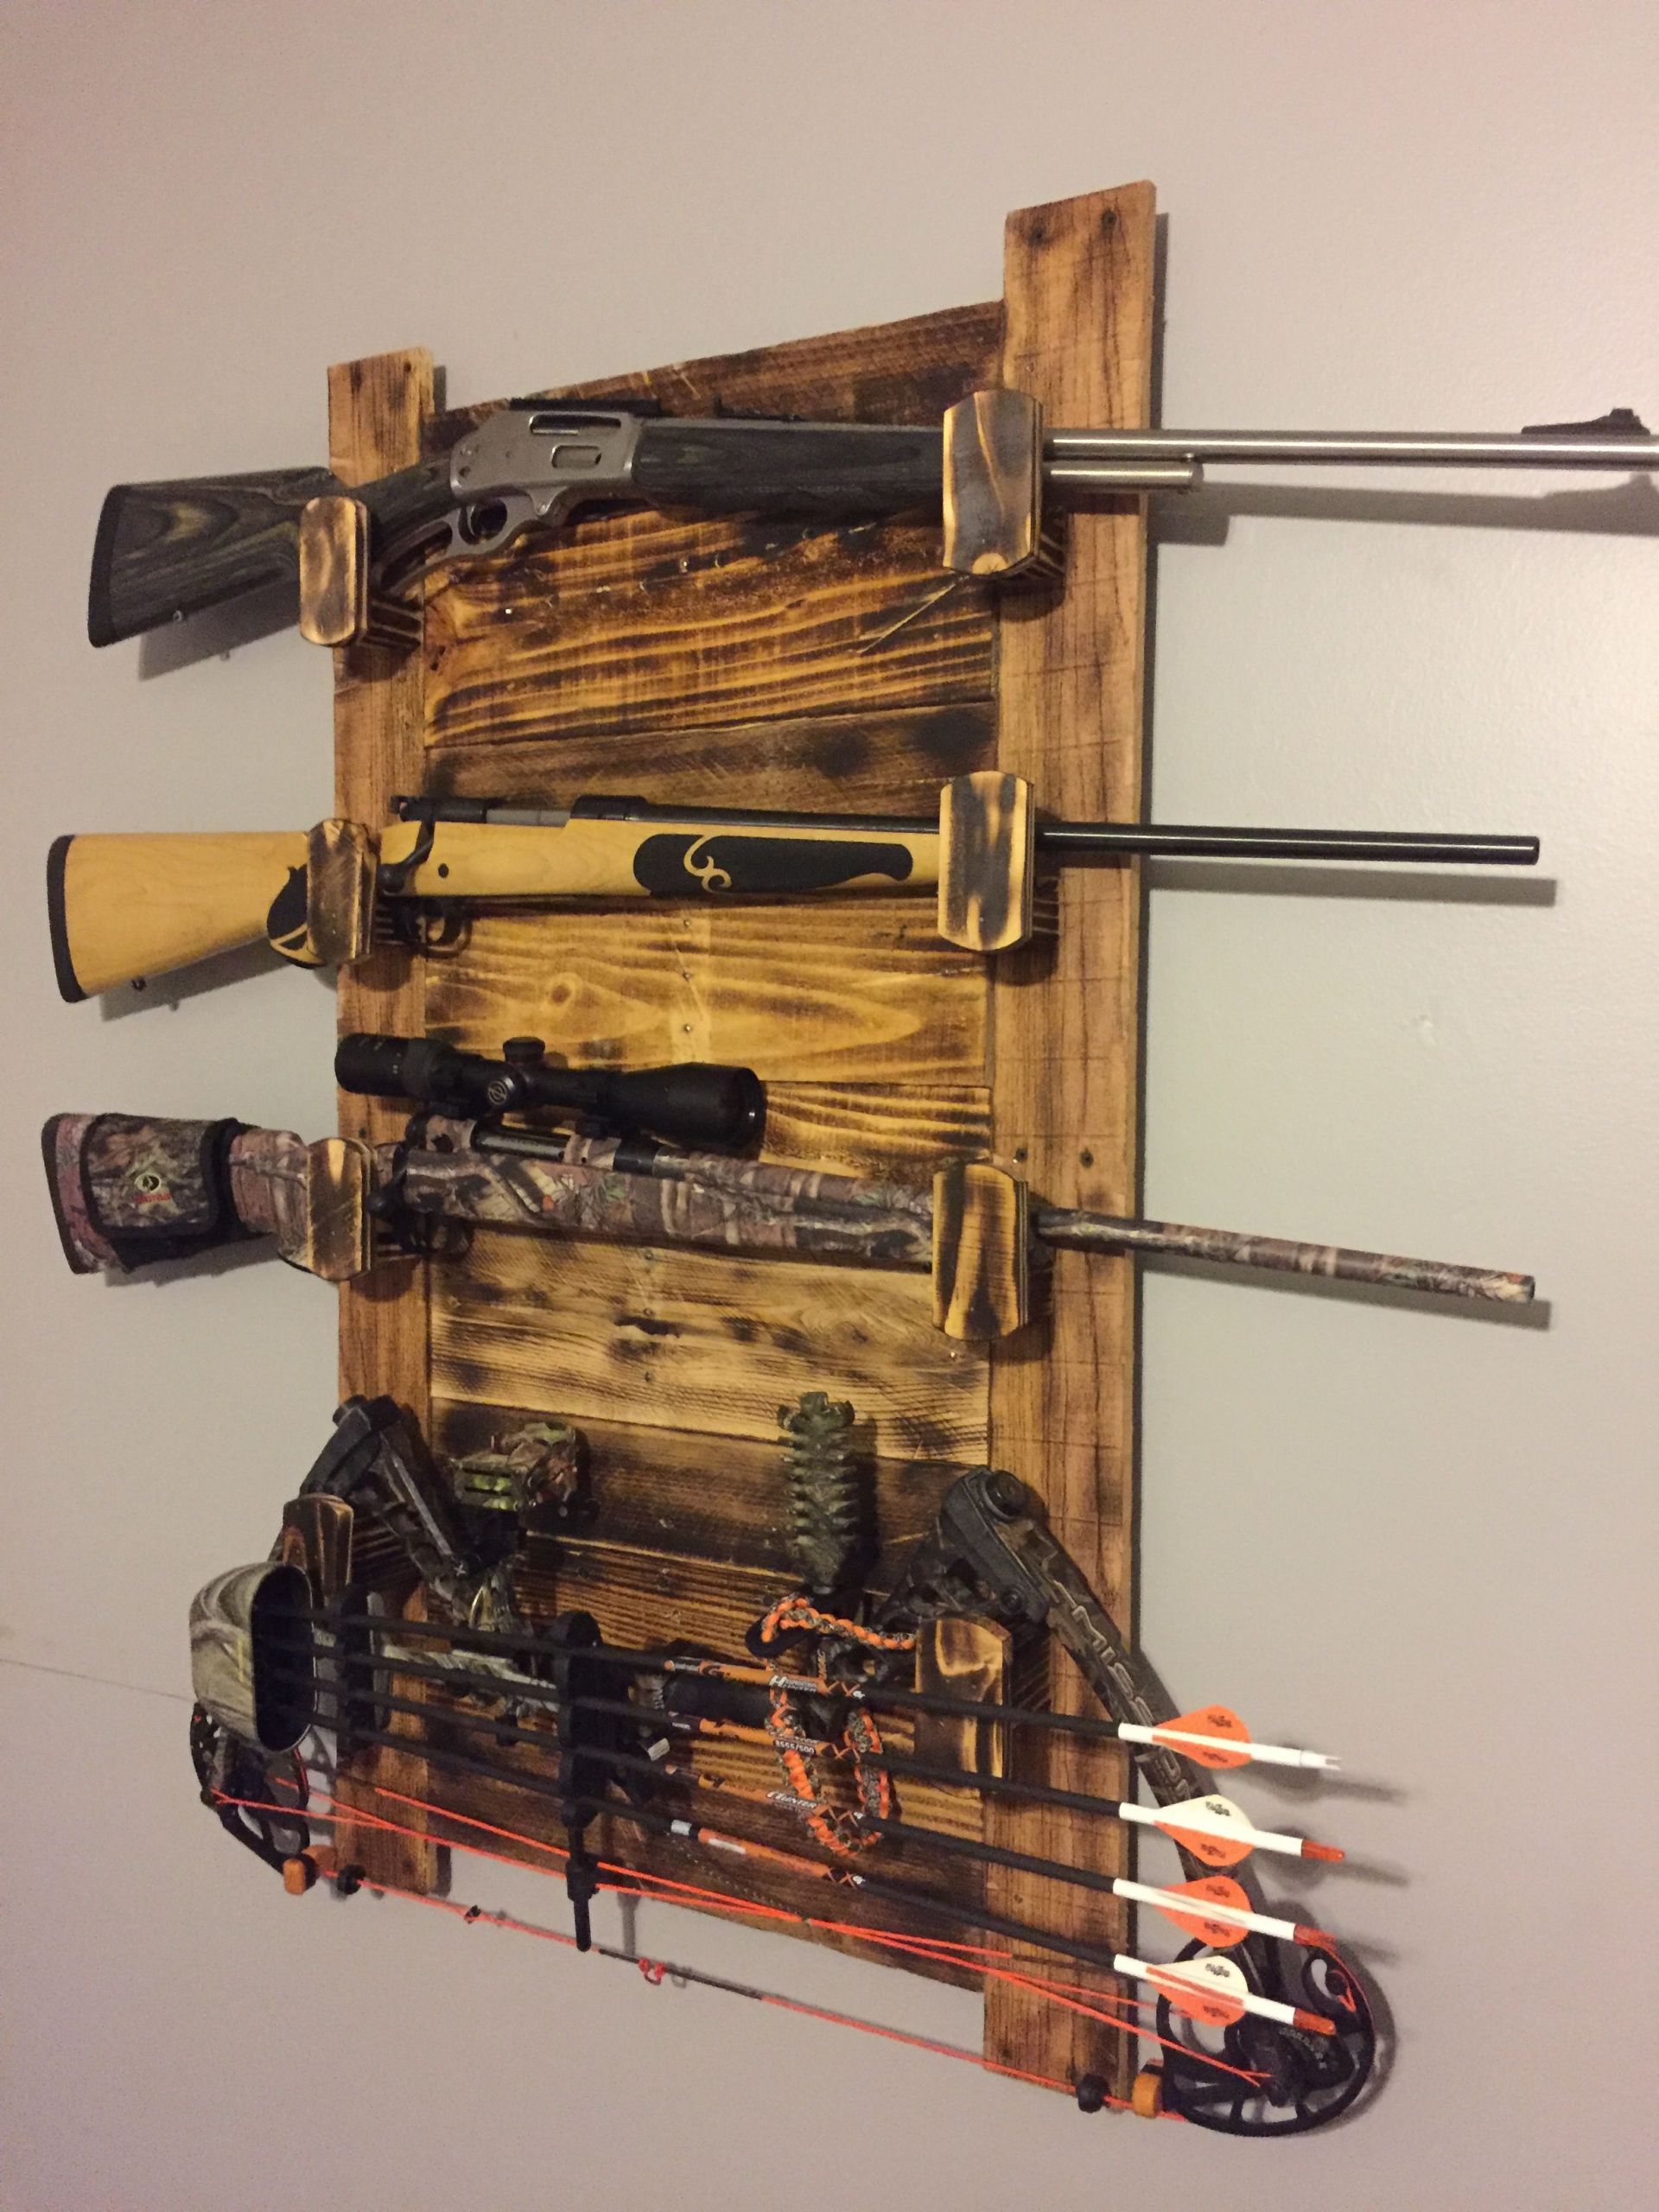 DIY Rifle Rack
 Pin by Coltan Donald on Archery in 2019